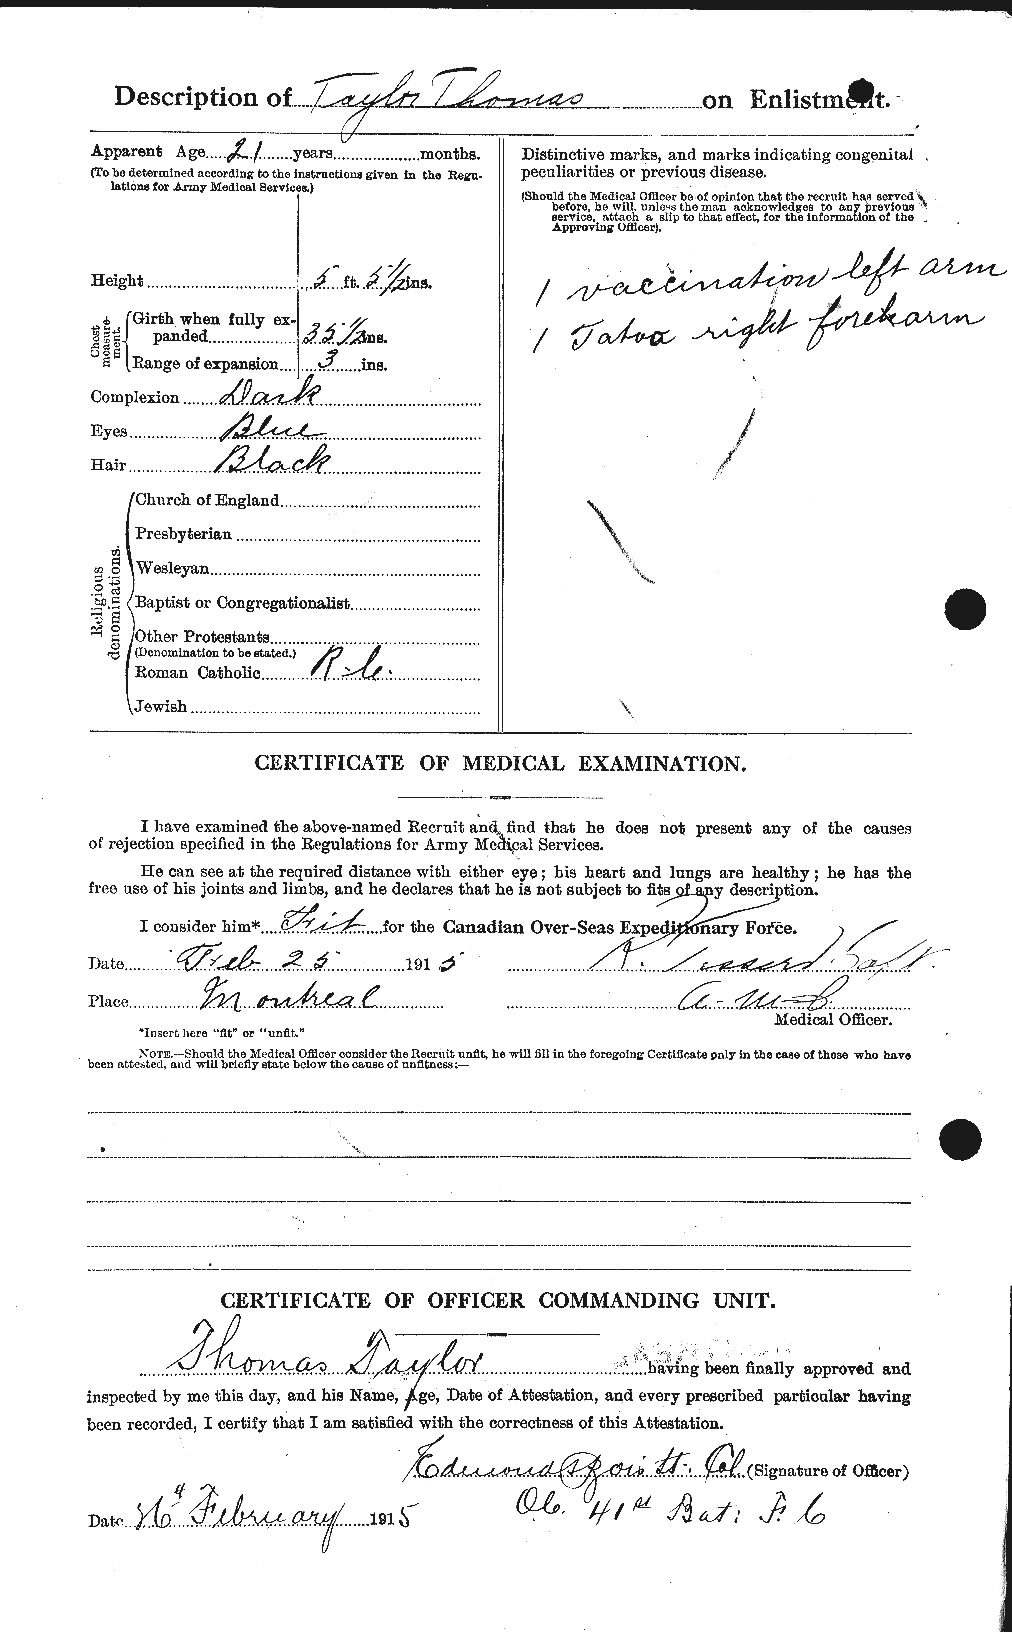 Personnel Records of the First World War - CEF 627961b